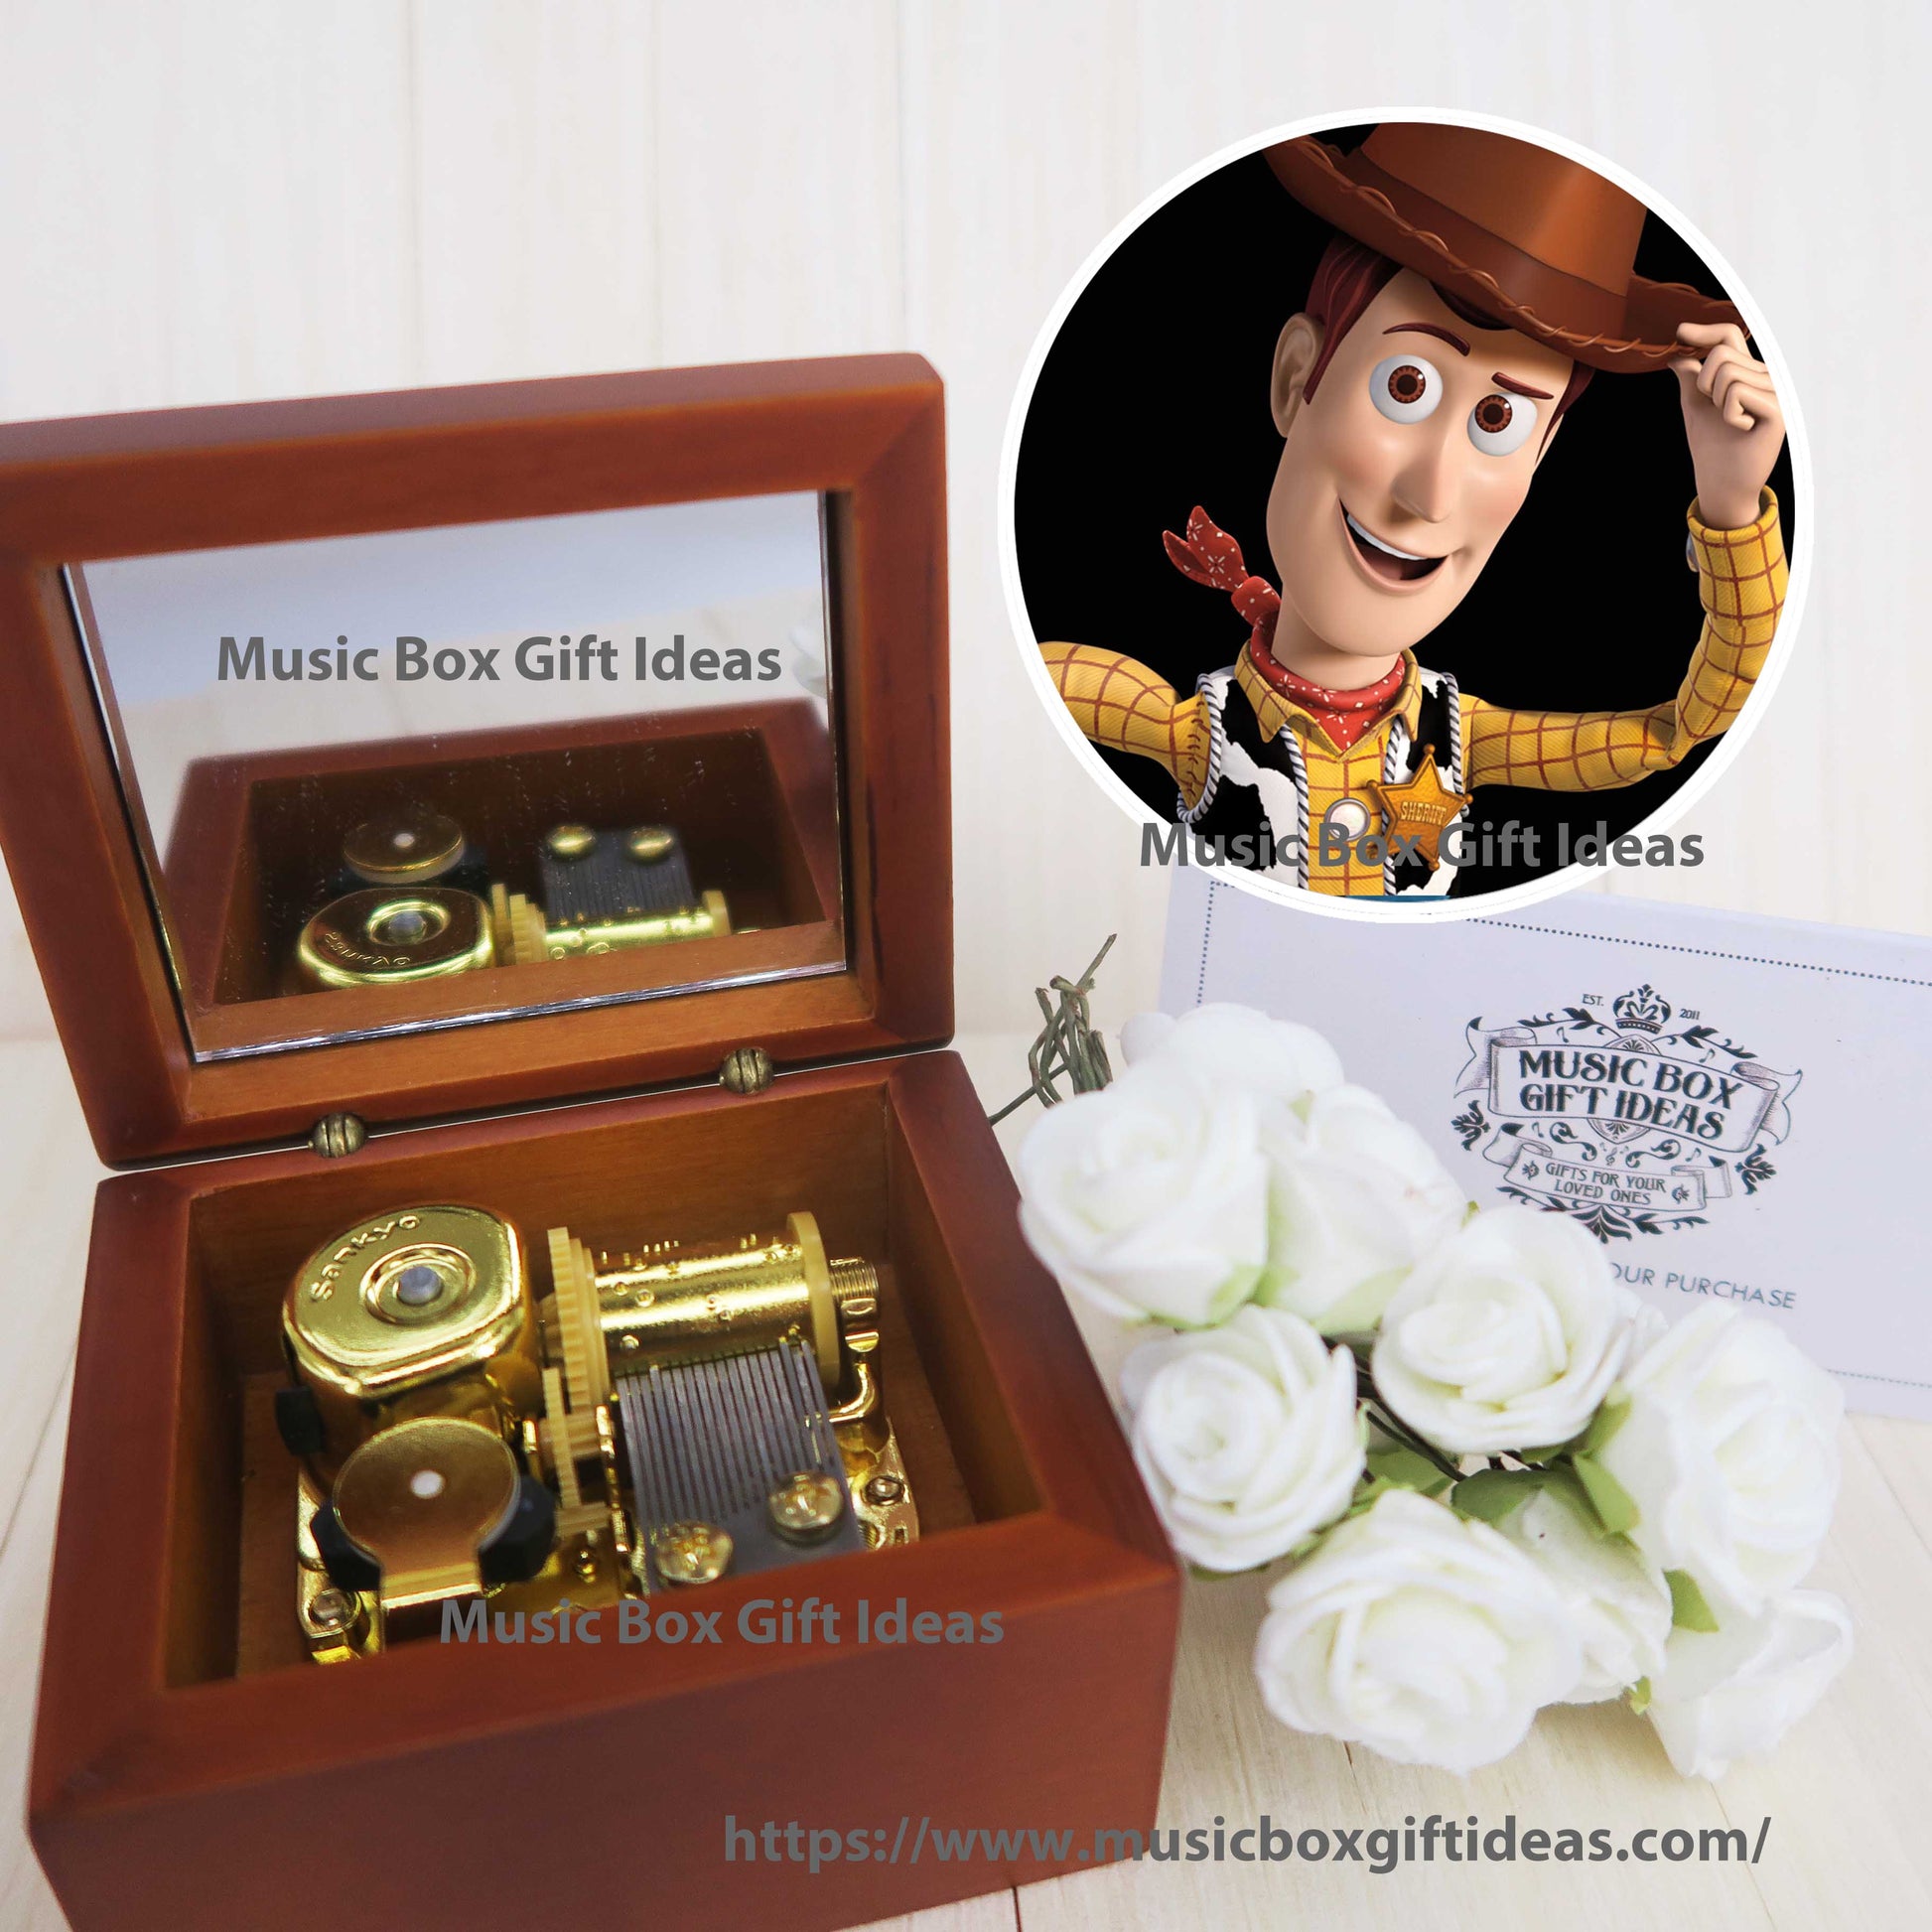 Disney Toy Story Soundtrack You've Got a Friend in Me 18-Note Music Box Gift for Friends Graduation (Wooden Clockwork) - Music Box Gift Ideas